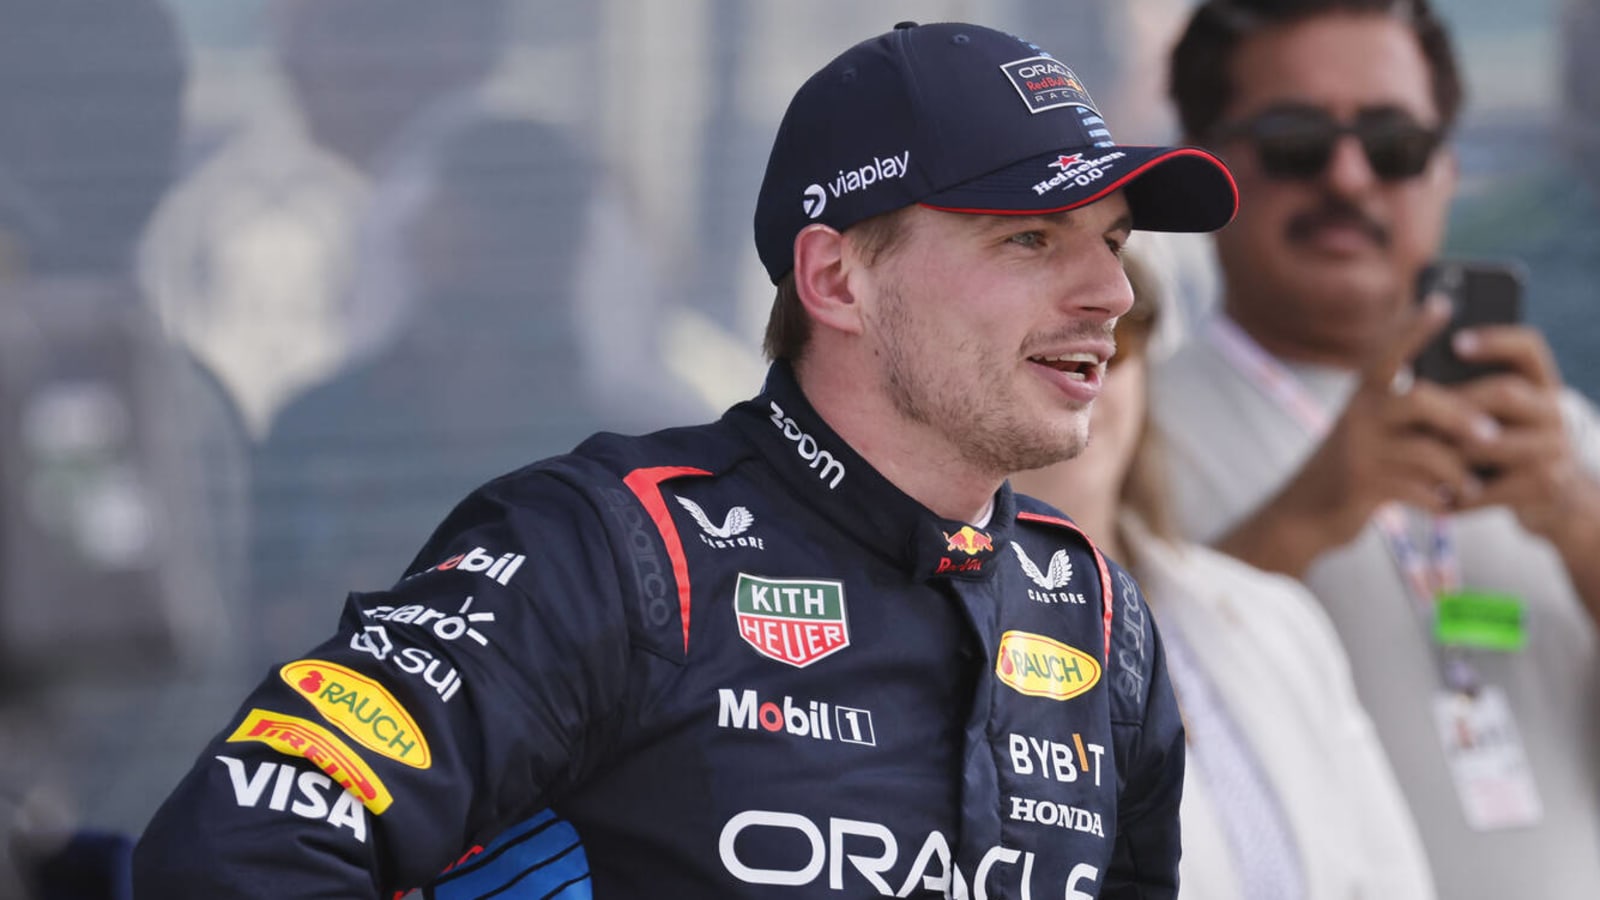 F1 CEO Stefano Domenicali claims Max Verstappen’s dominance will be replaced by ‘someone’ in the future